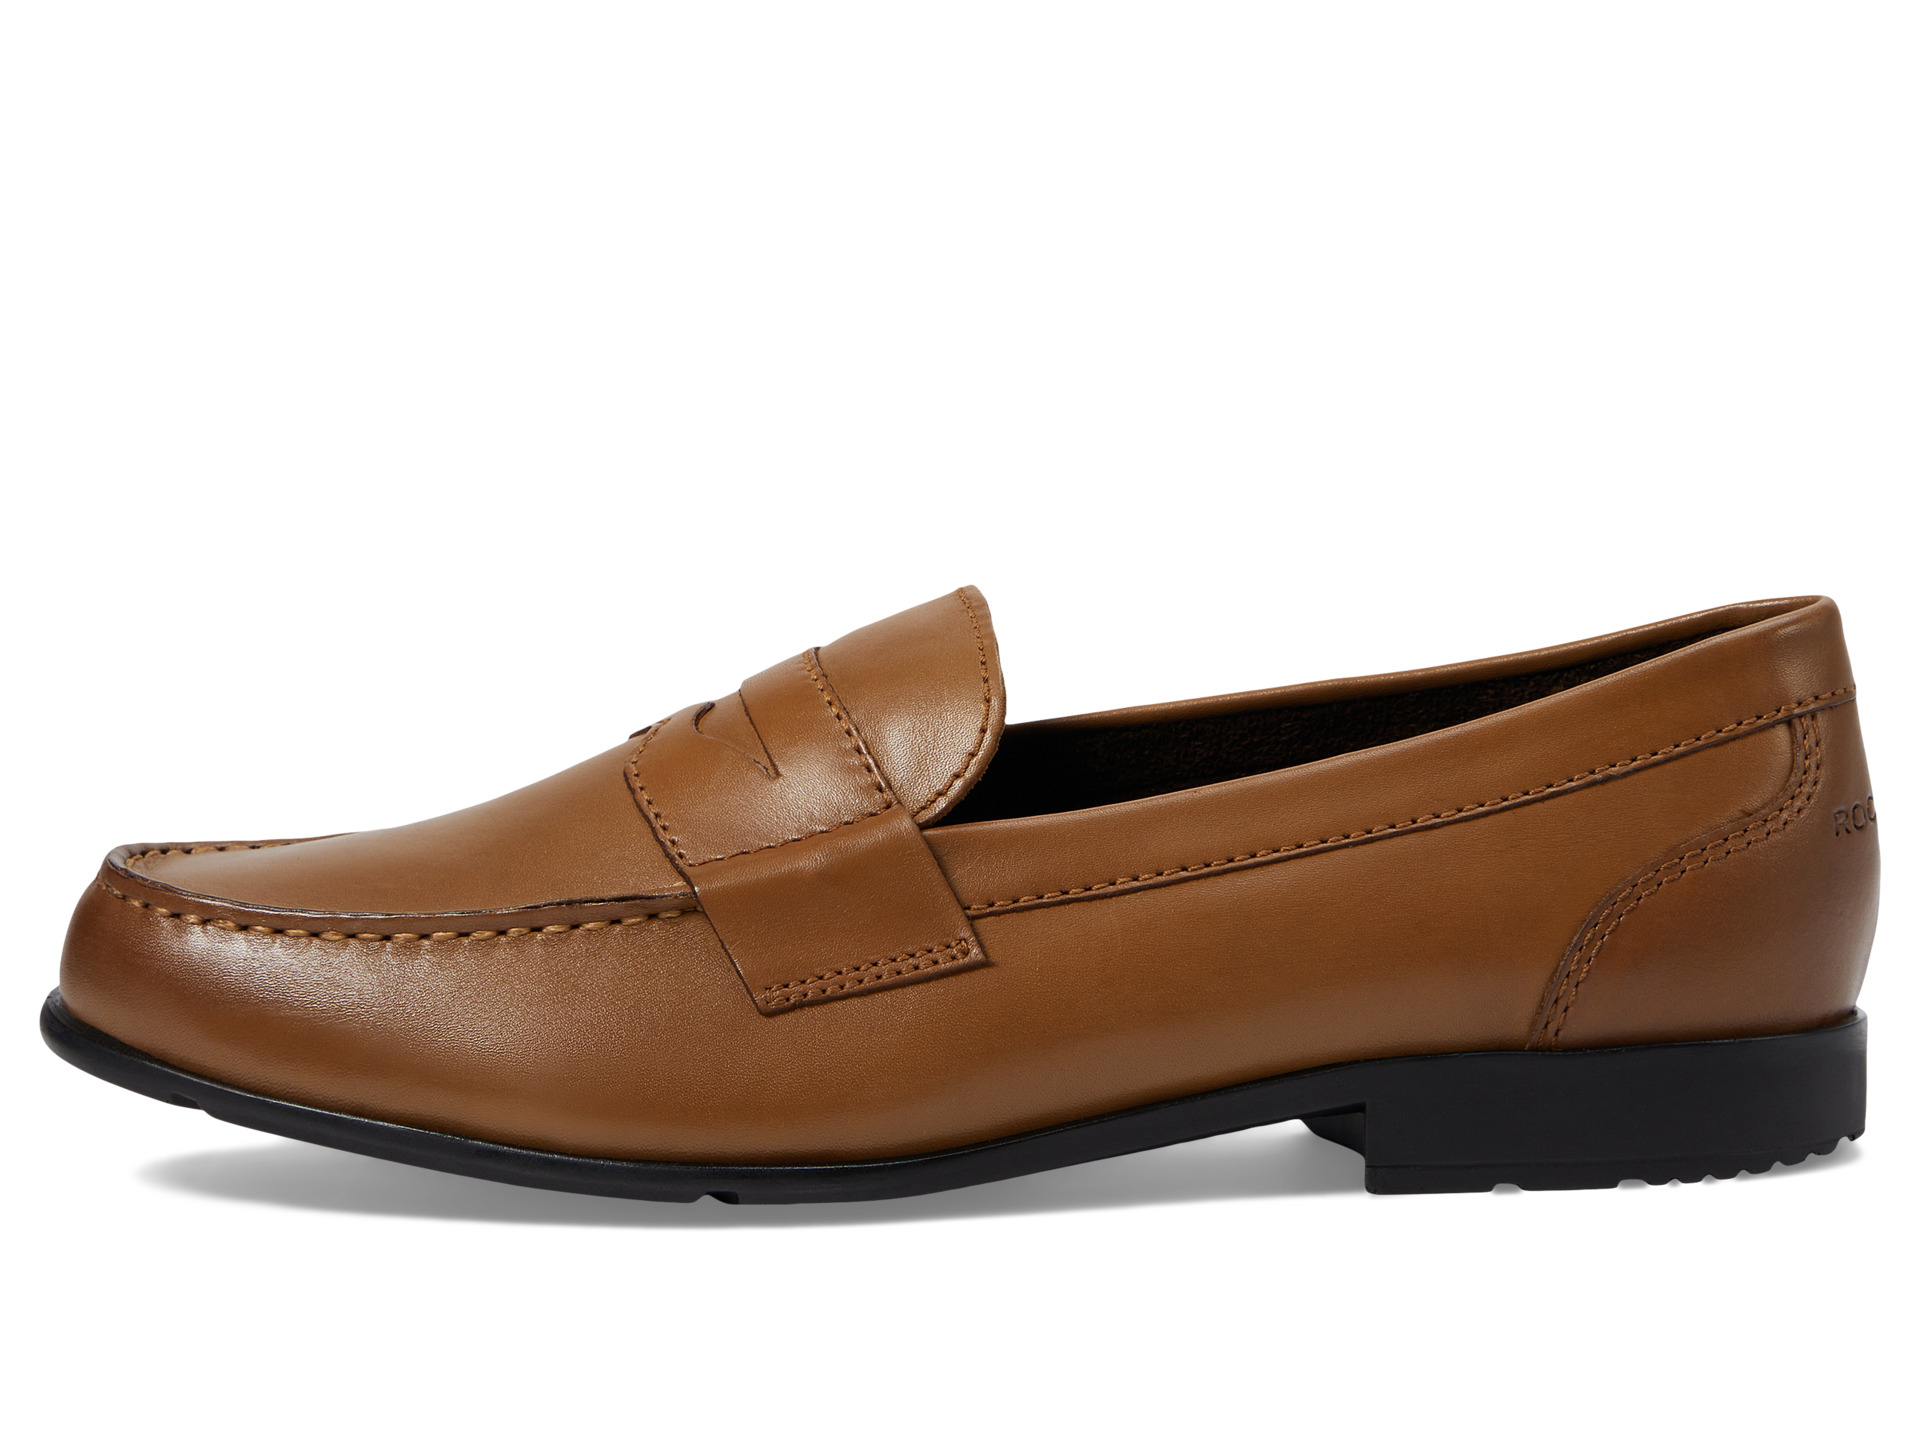 Rockport Classic Loafer Lite Penny at Zappos.com